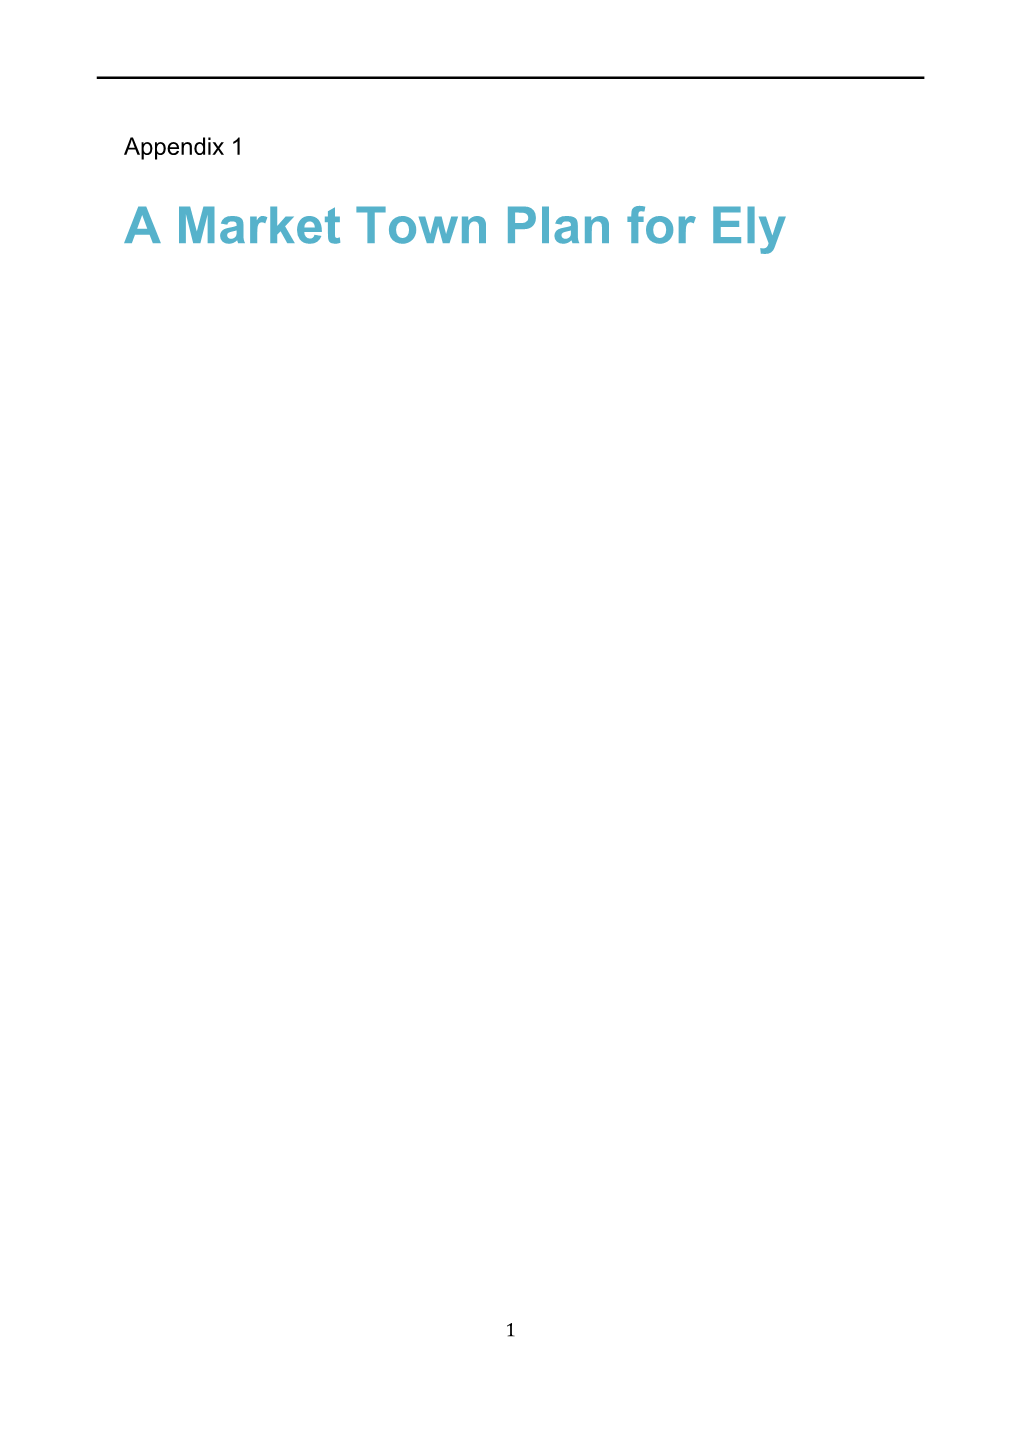 A Market Town Plan for Ely